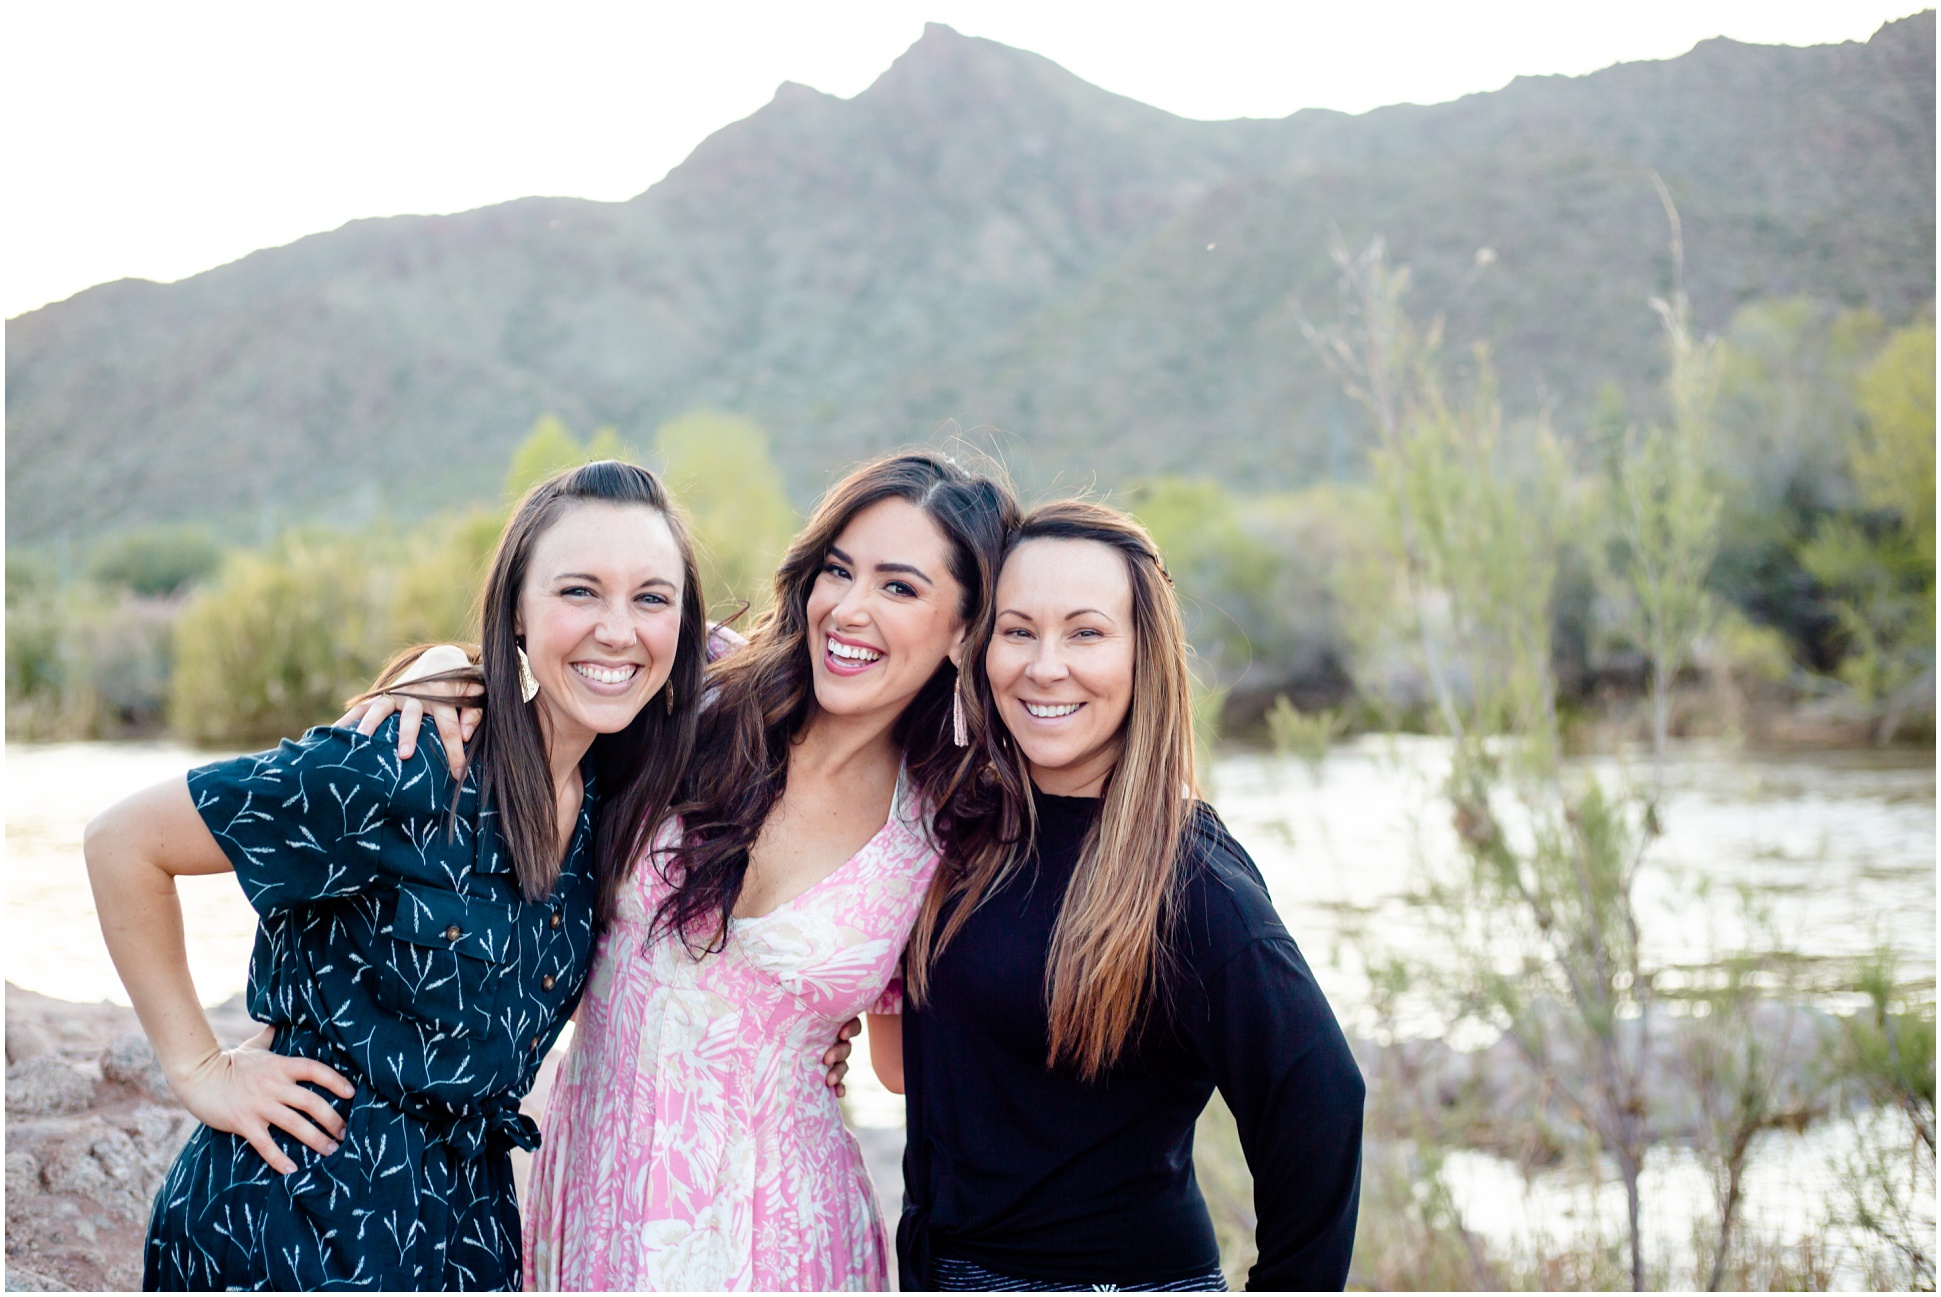 Jessica Wood, Anette De La Rosa, and Janice Ramos smiling at the camera at the Salt River